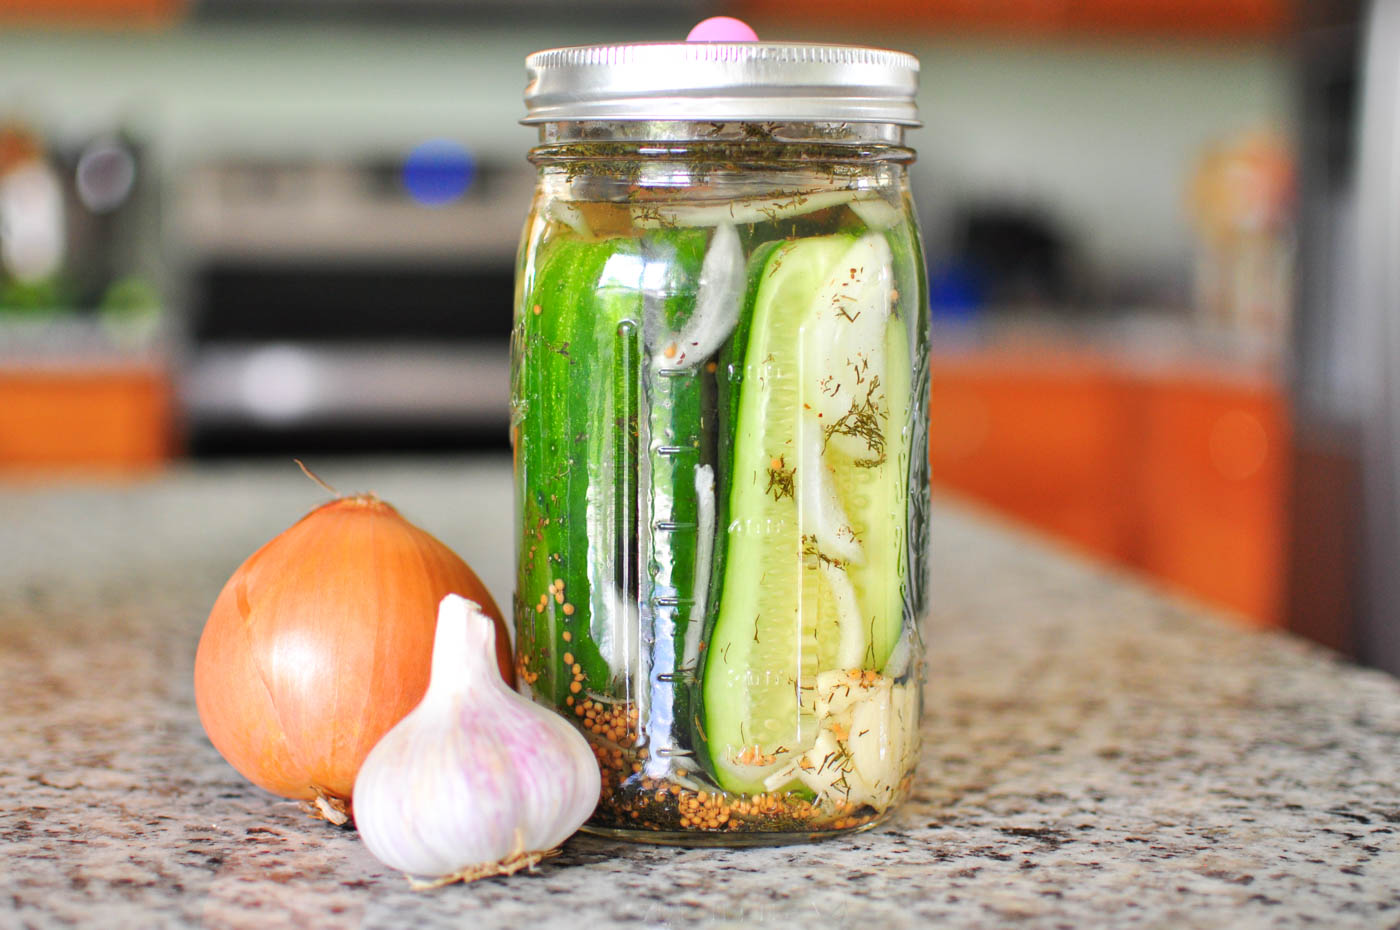 Homemade Lactofermented Dill Pickles Recipe & How to Make Pickles